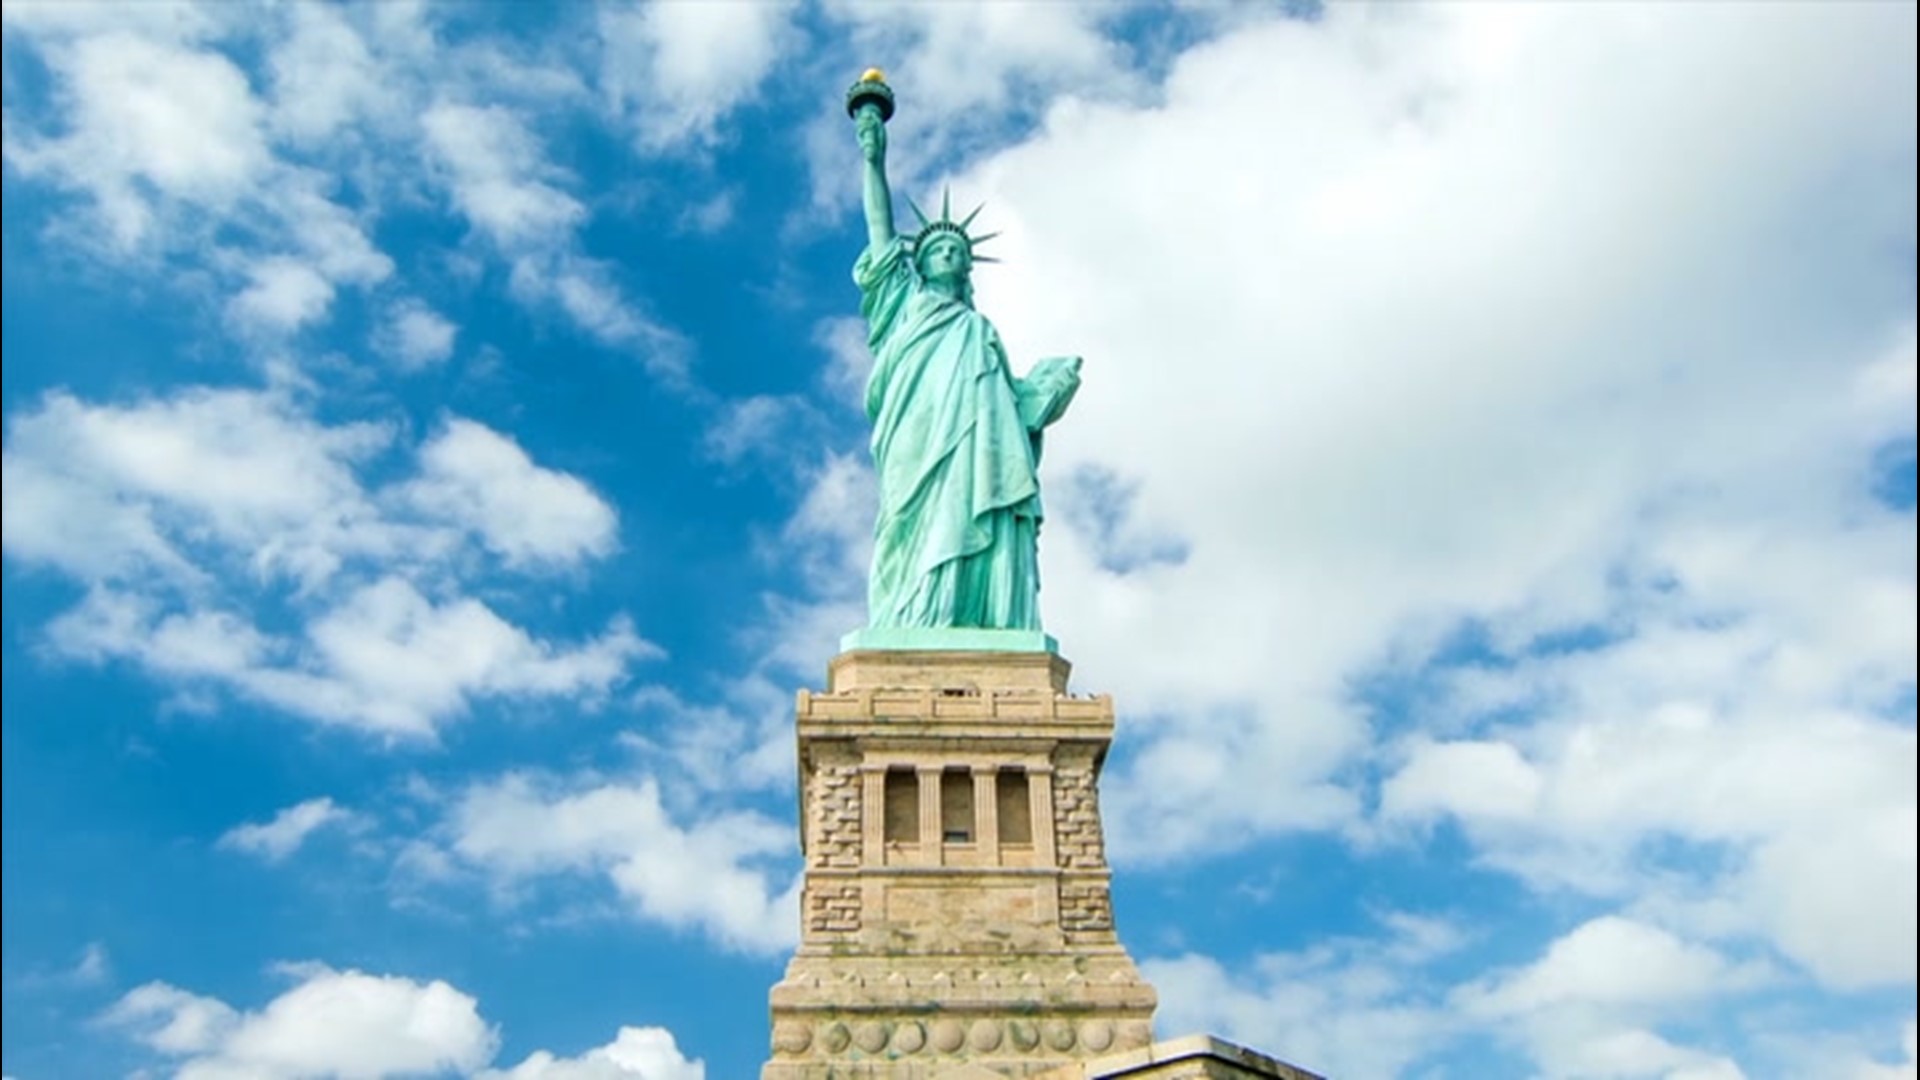 The copper Statue of Liberty as it first appeared in New York in